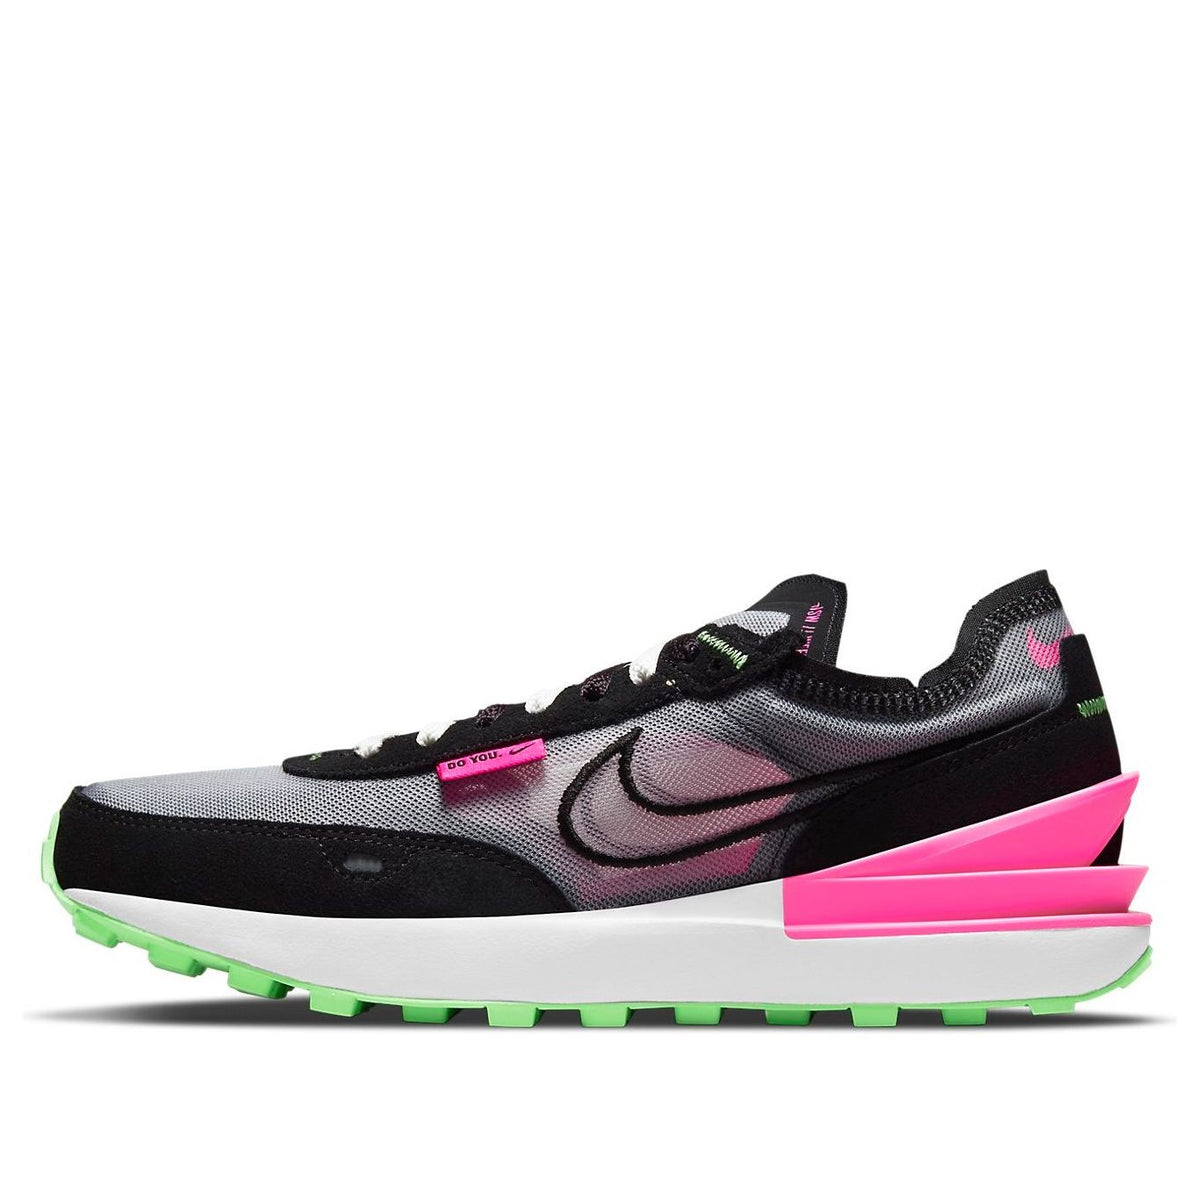 Nike Waffle One Low-top Running Shoes Black/Pink DM8143-100